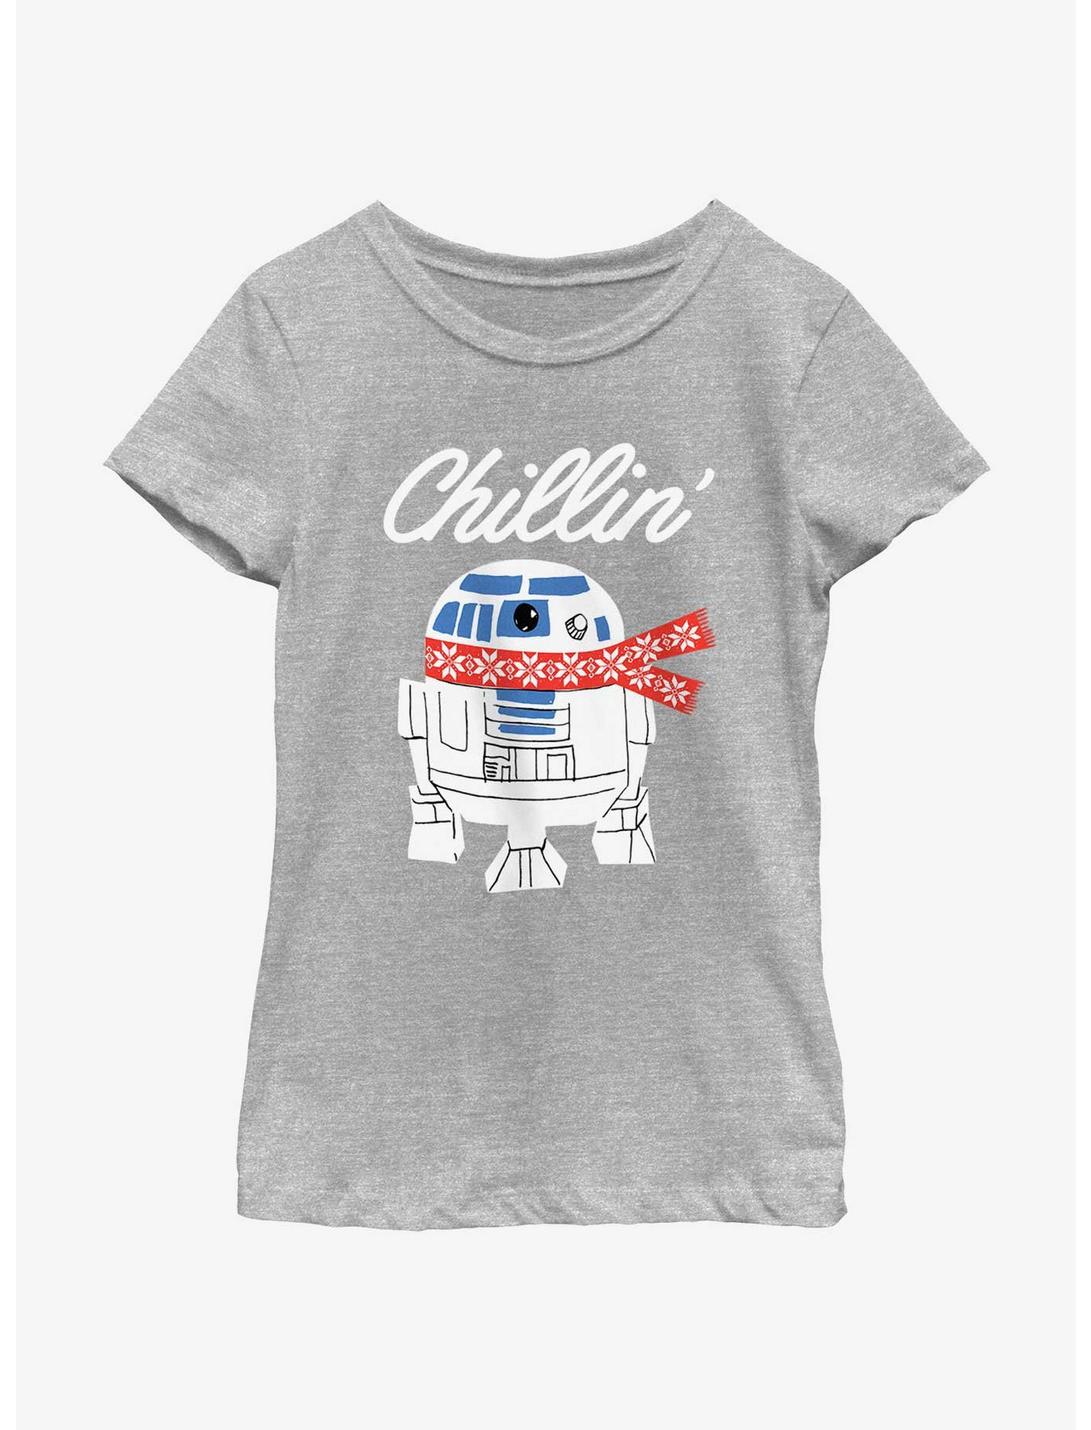 Star Wars R2-D2 Chillin' Youth Girls T-Shirt, ATH HTR, hi-res